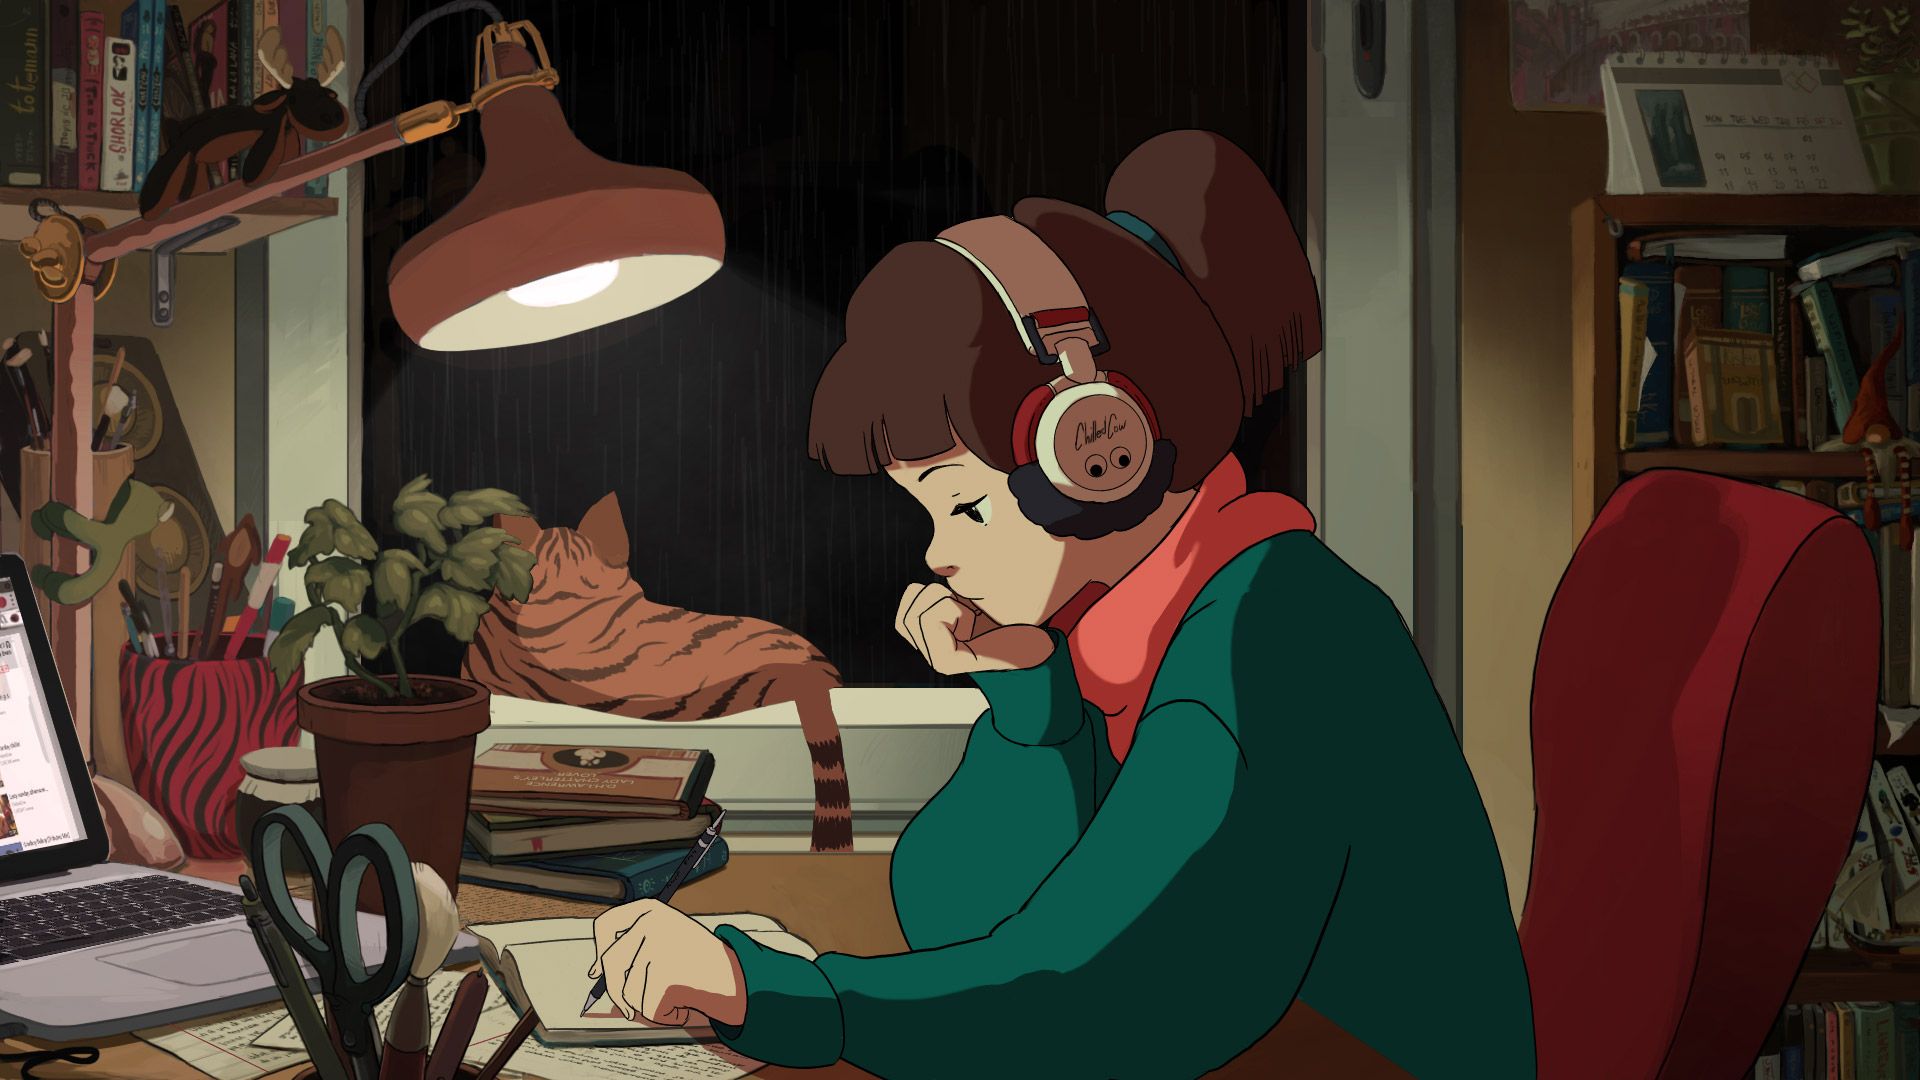 Lo Fi Hip Hop Beats To Study Relax To Girl (Wallpaper) (this Is The Best Resolution (1920x1080) Highest Dpi (96) I Could Find). If Anyone Has It At A Better Resolution Without The Dammed Compression I